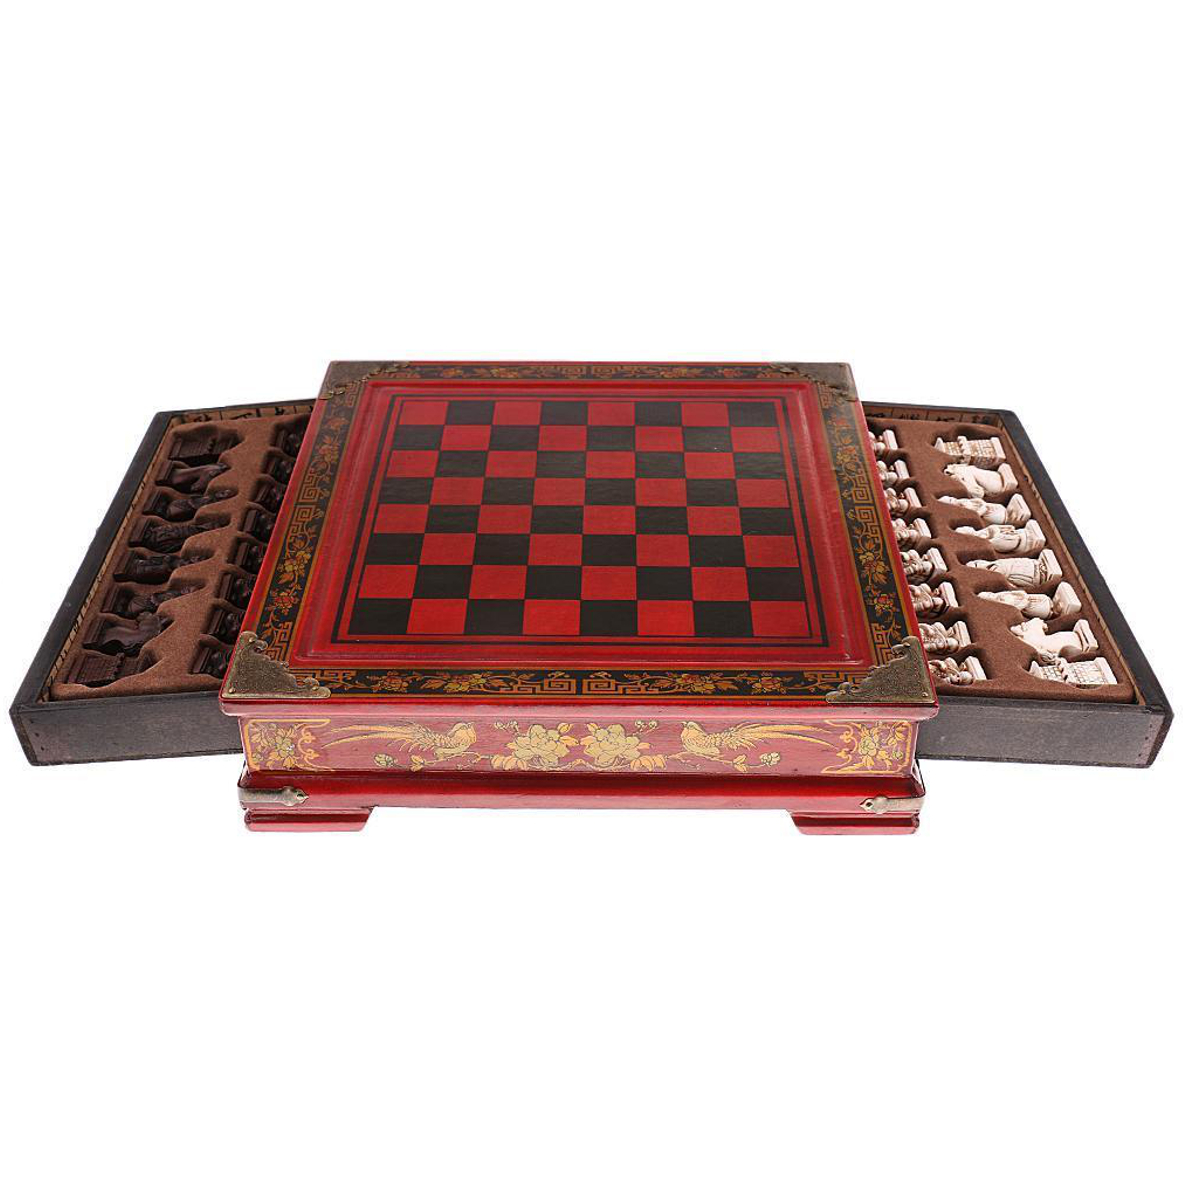 Vintage-Wooden-Chinese-Chess-Board-Table-Game-Set-Pieces-Gift-Toy-Collectibles-1454841-3